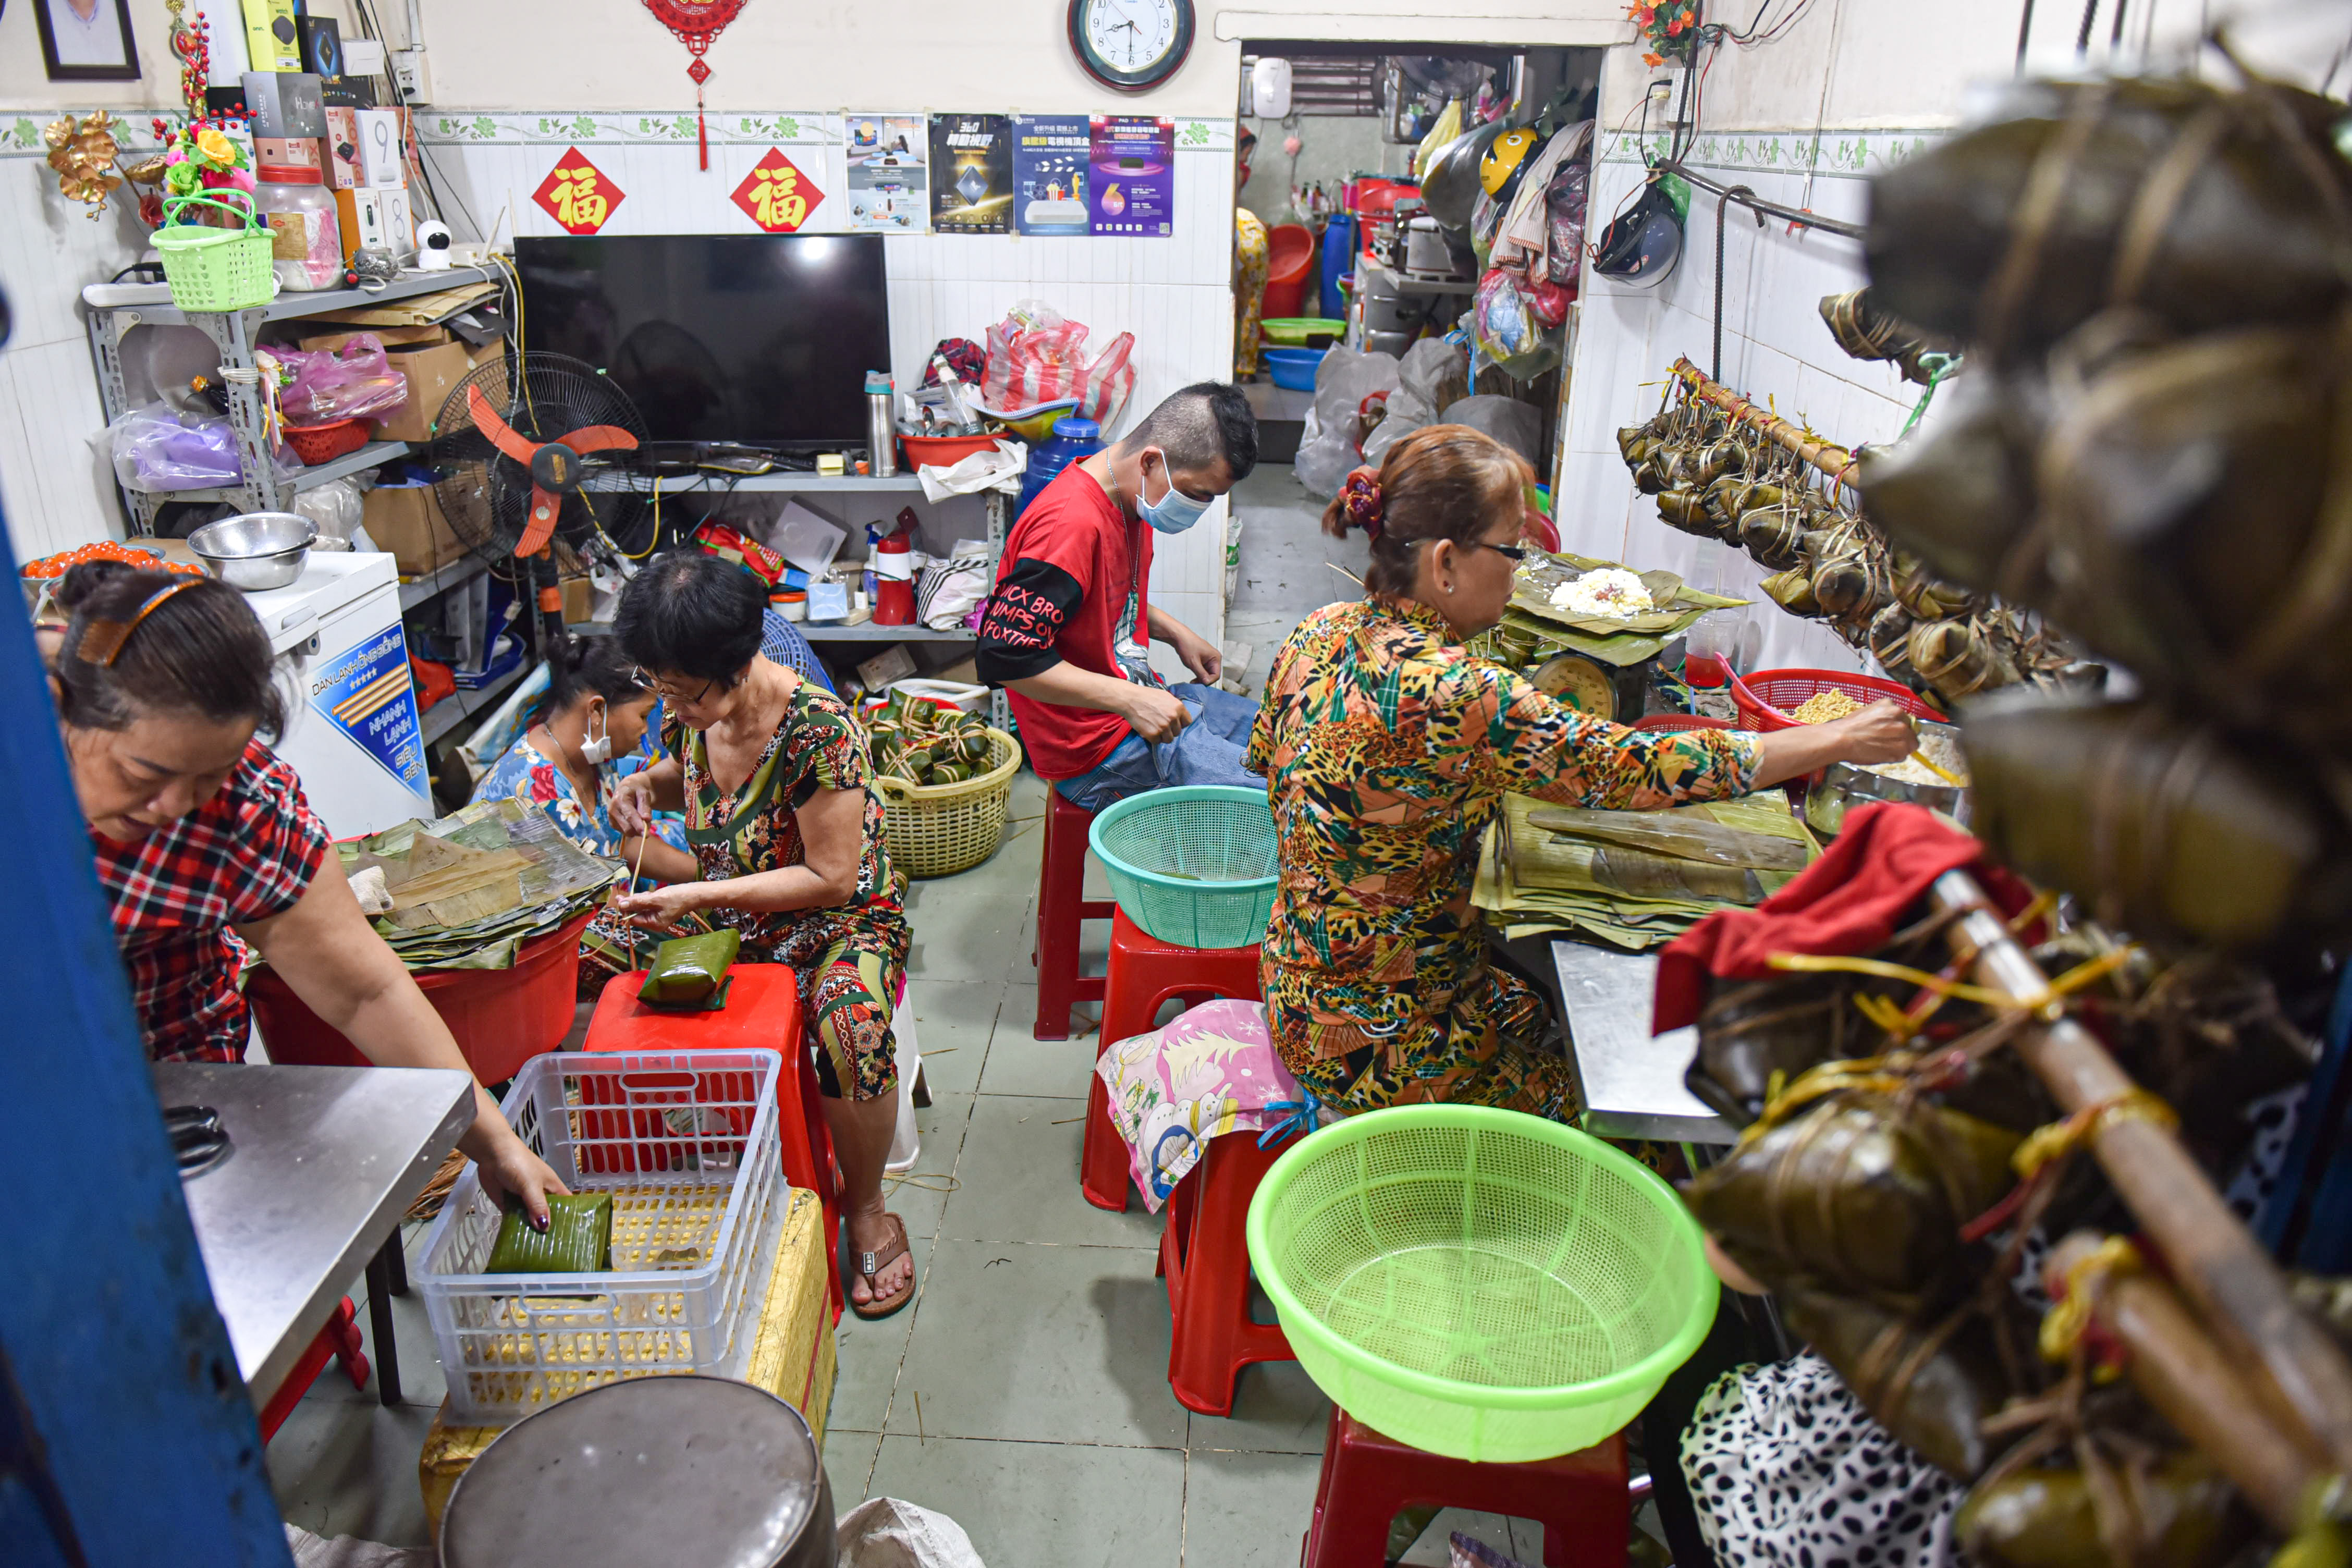 Staff prepares zongzi for the 2022 Duanwu Festival at An Ky Banh Chung shop in District 11, Ho Chi Minh City. Photo: Ngoc Phuong / Tuoi Tre